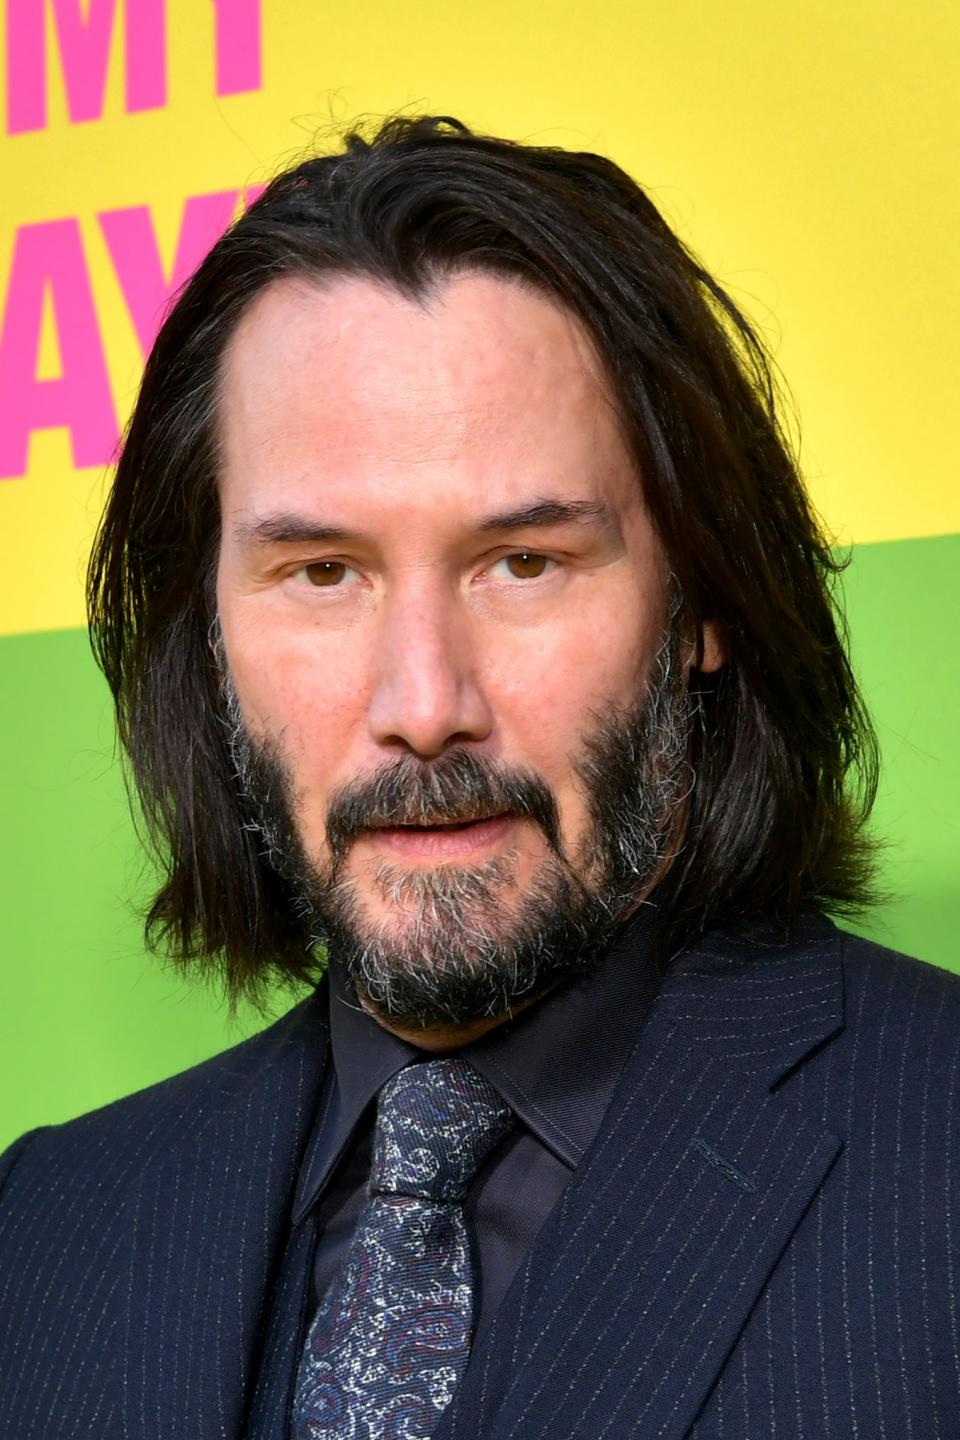 Keanu in a pin-striped suit and tie poses at event, smiling slightly